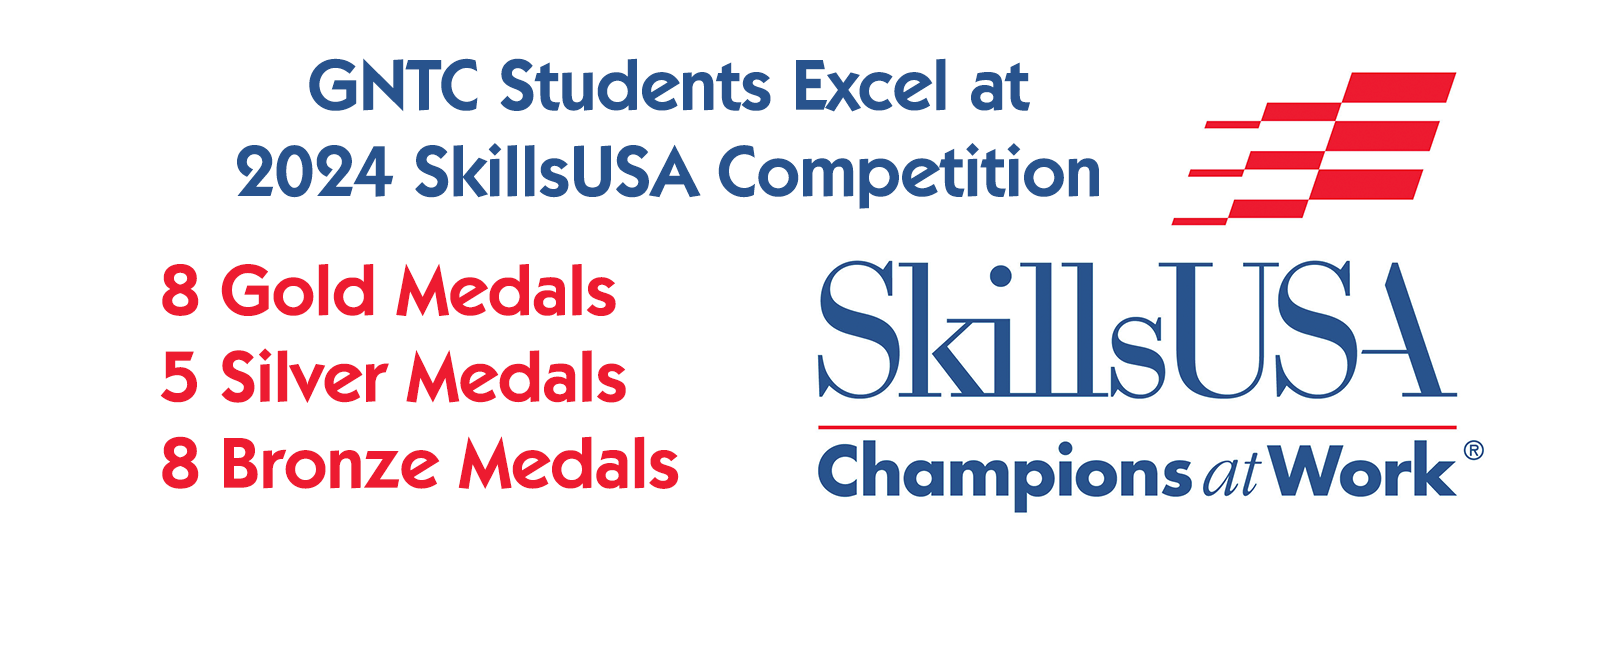 GNTC Students Excel at 2024 SkillsUSA Competition
8 Gold Medals
5 Silver Medals
8 Bronze Medals